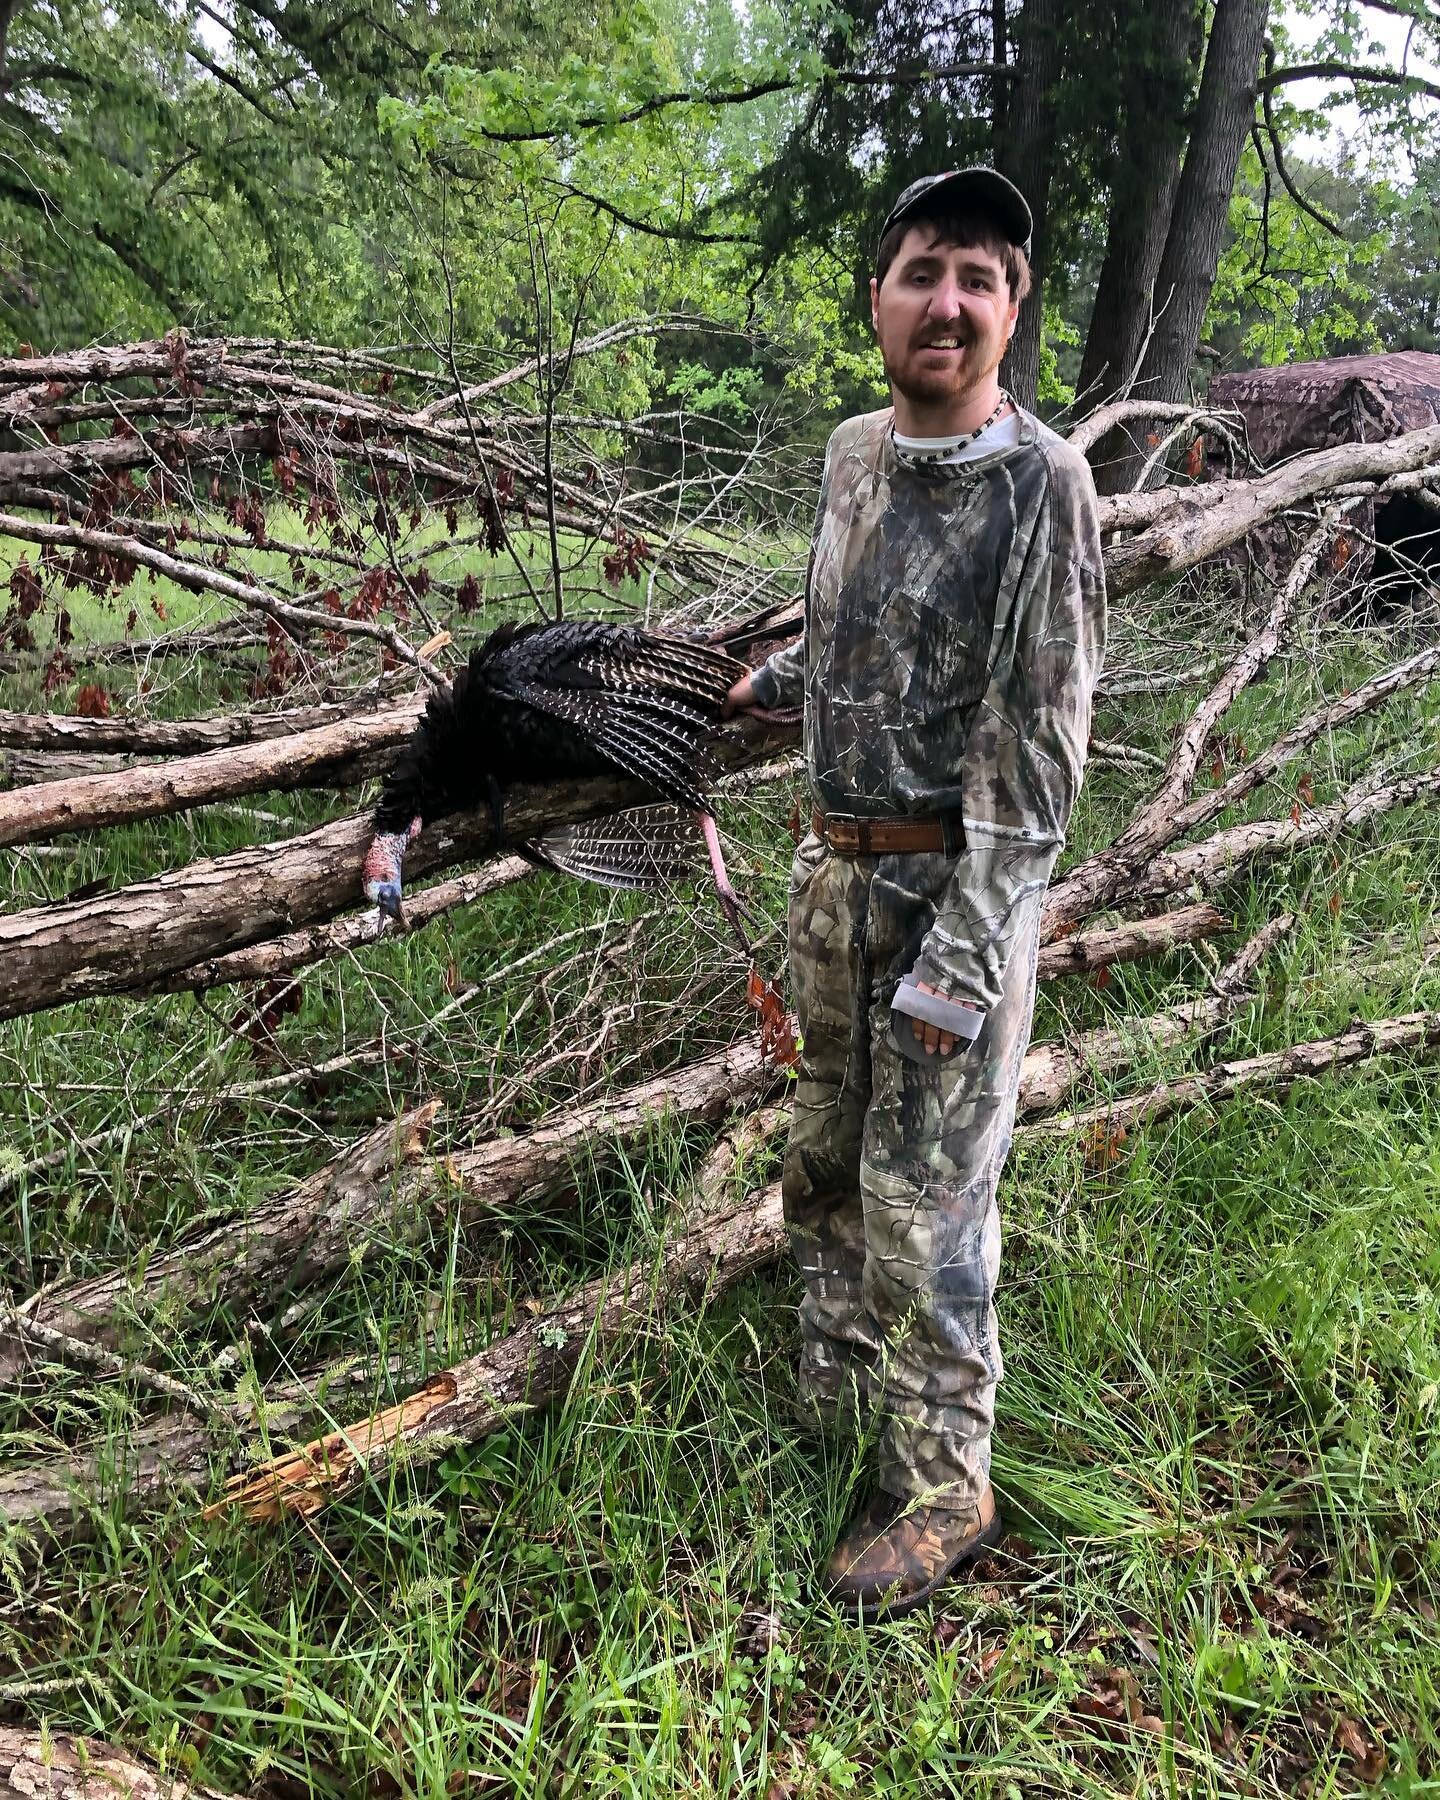 Our Main Man Ryan got it done with the nice Gobbler. Do it Ryan!!!